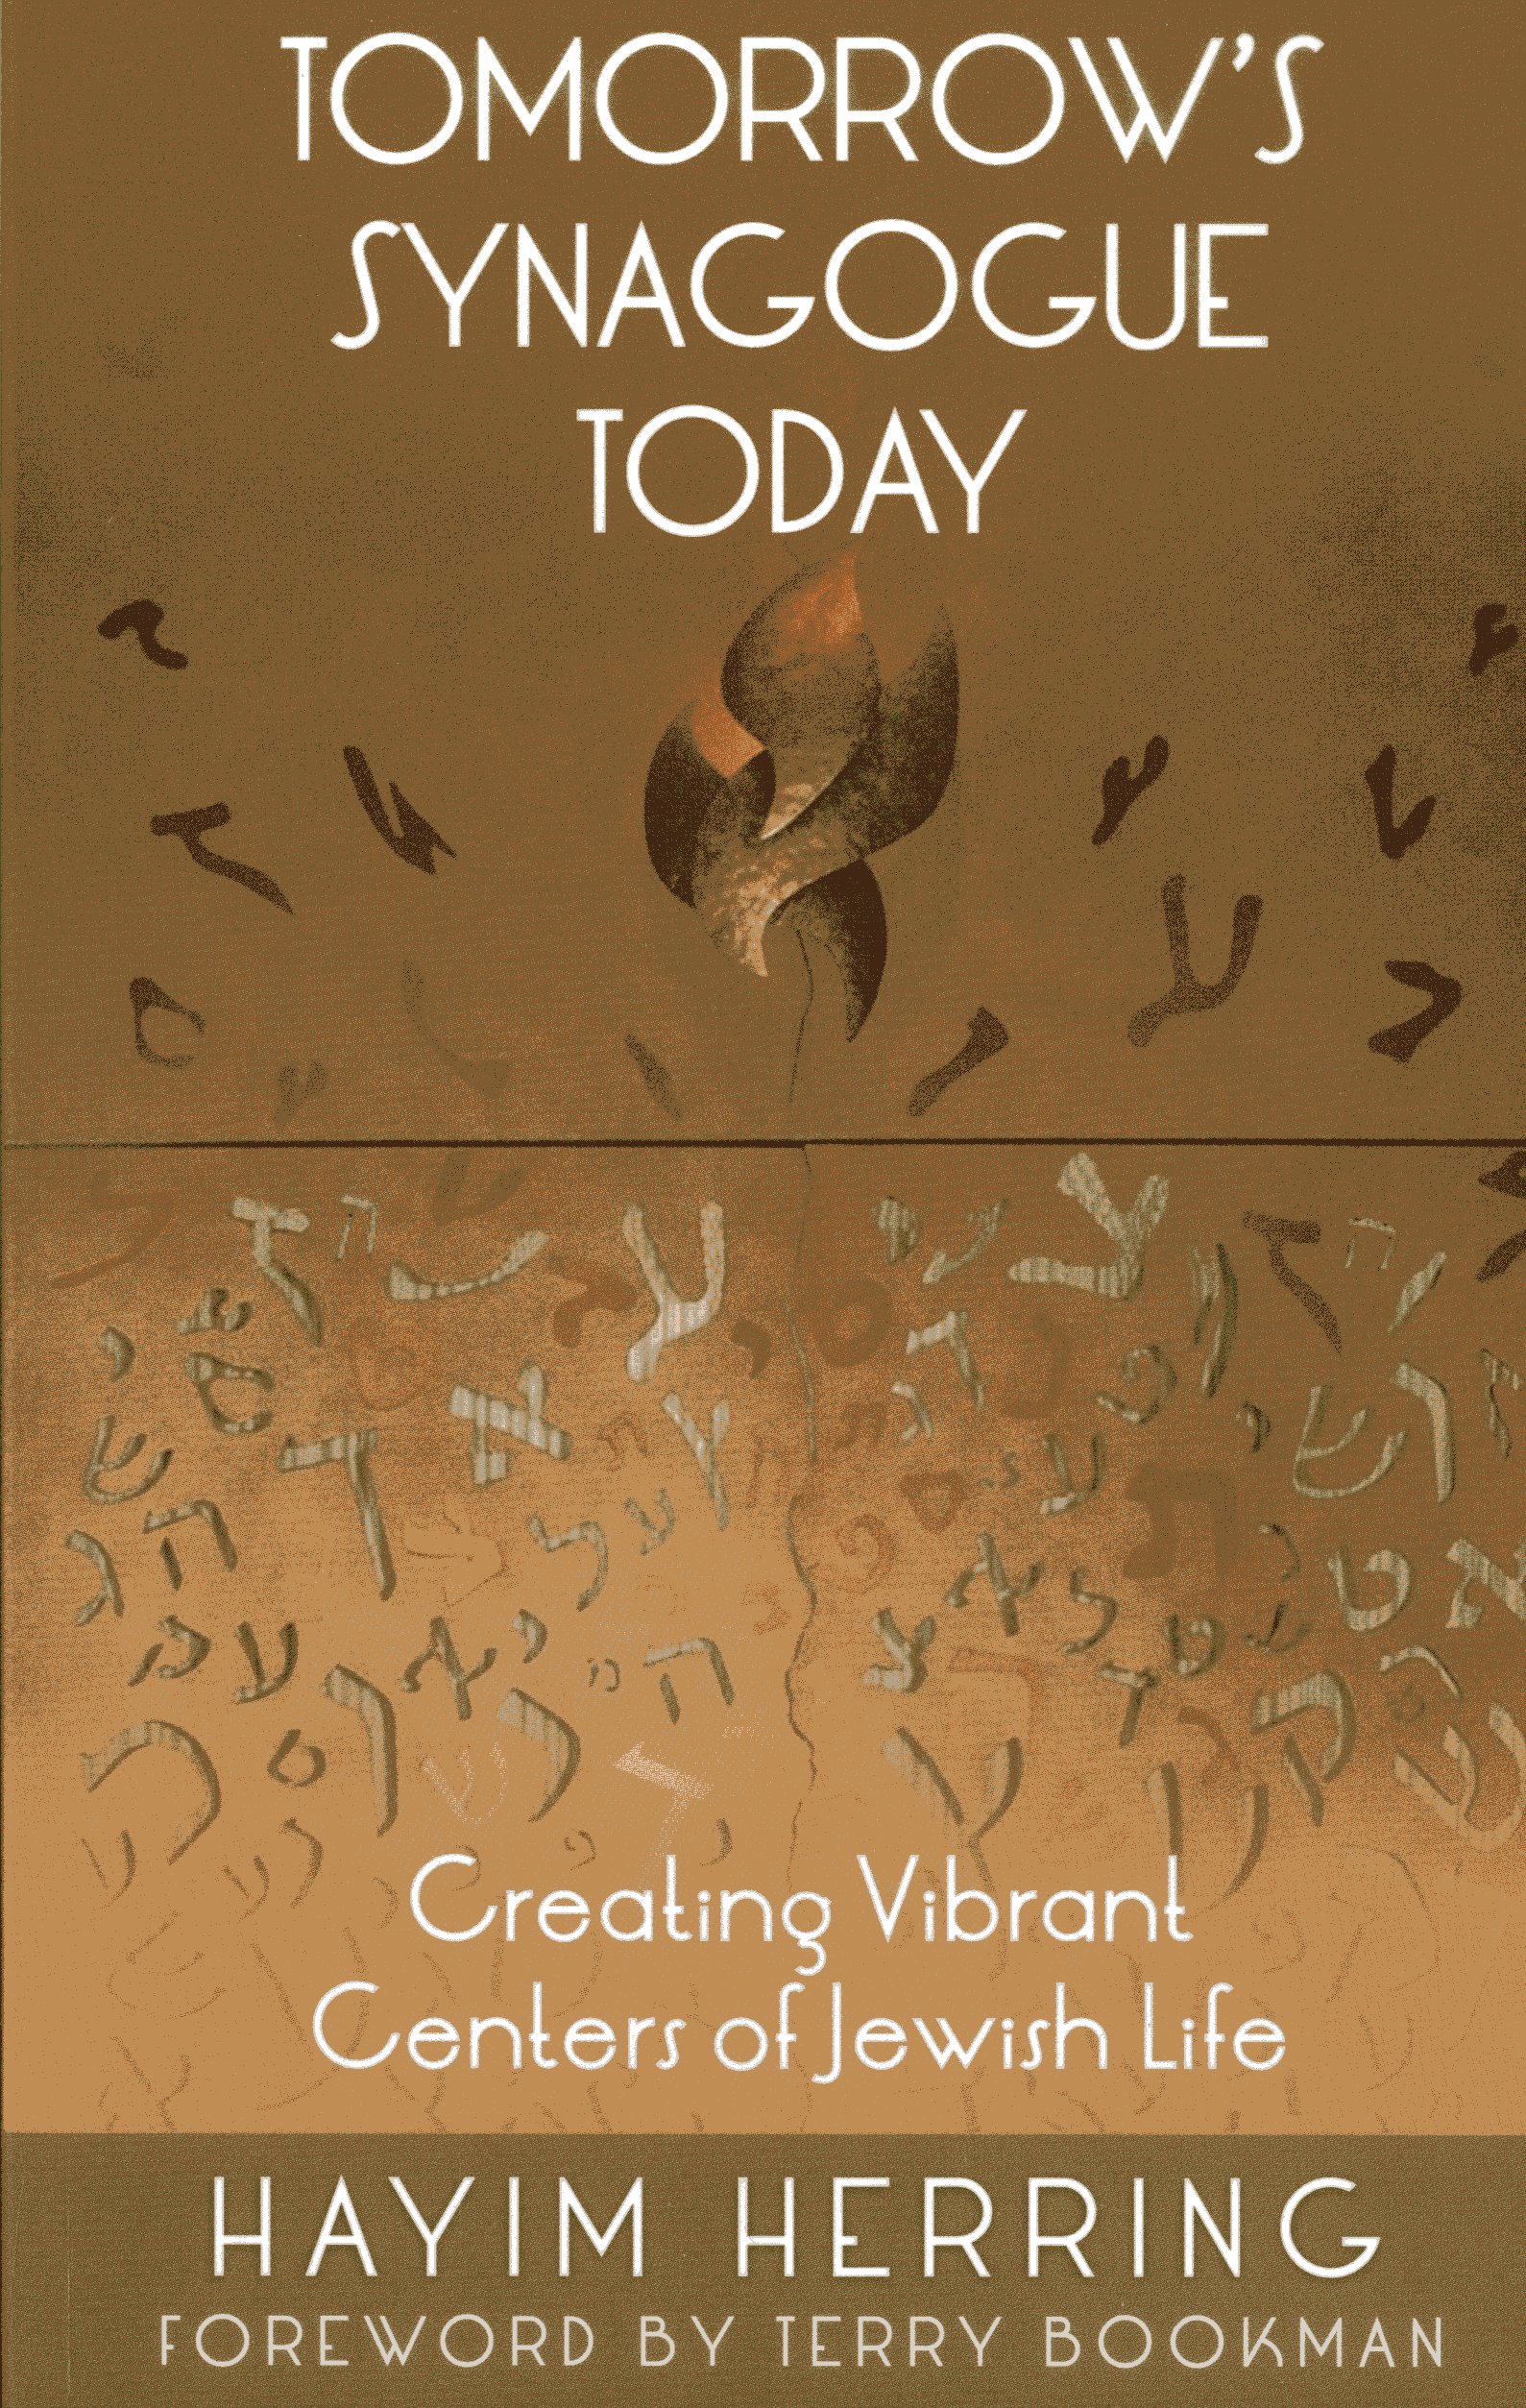 Tomorrow's Synagogue Today: Creating Vibrant Centers of Jewish Life